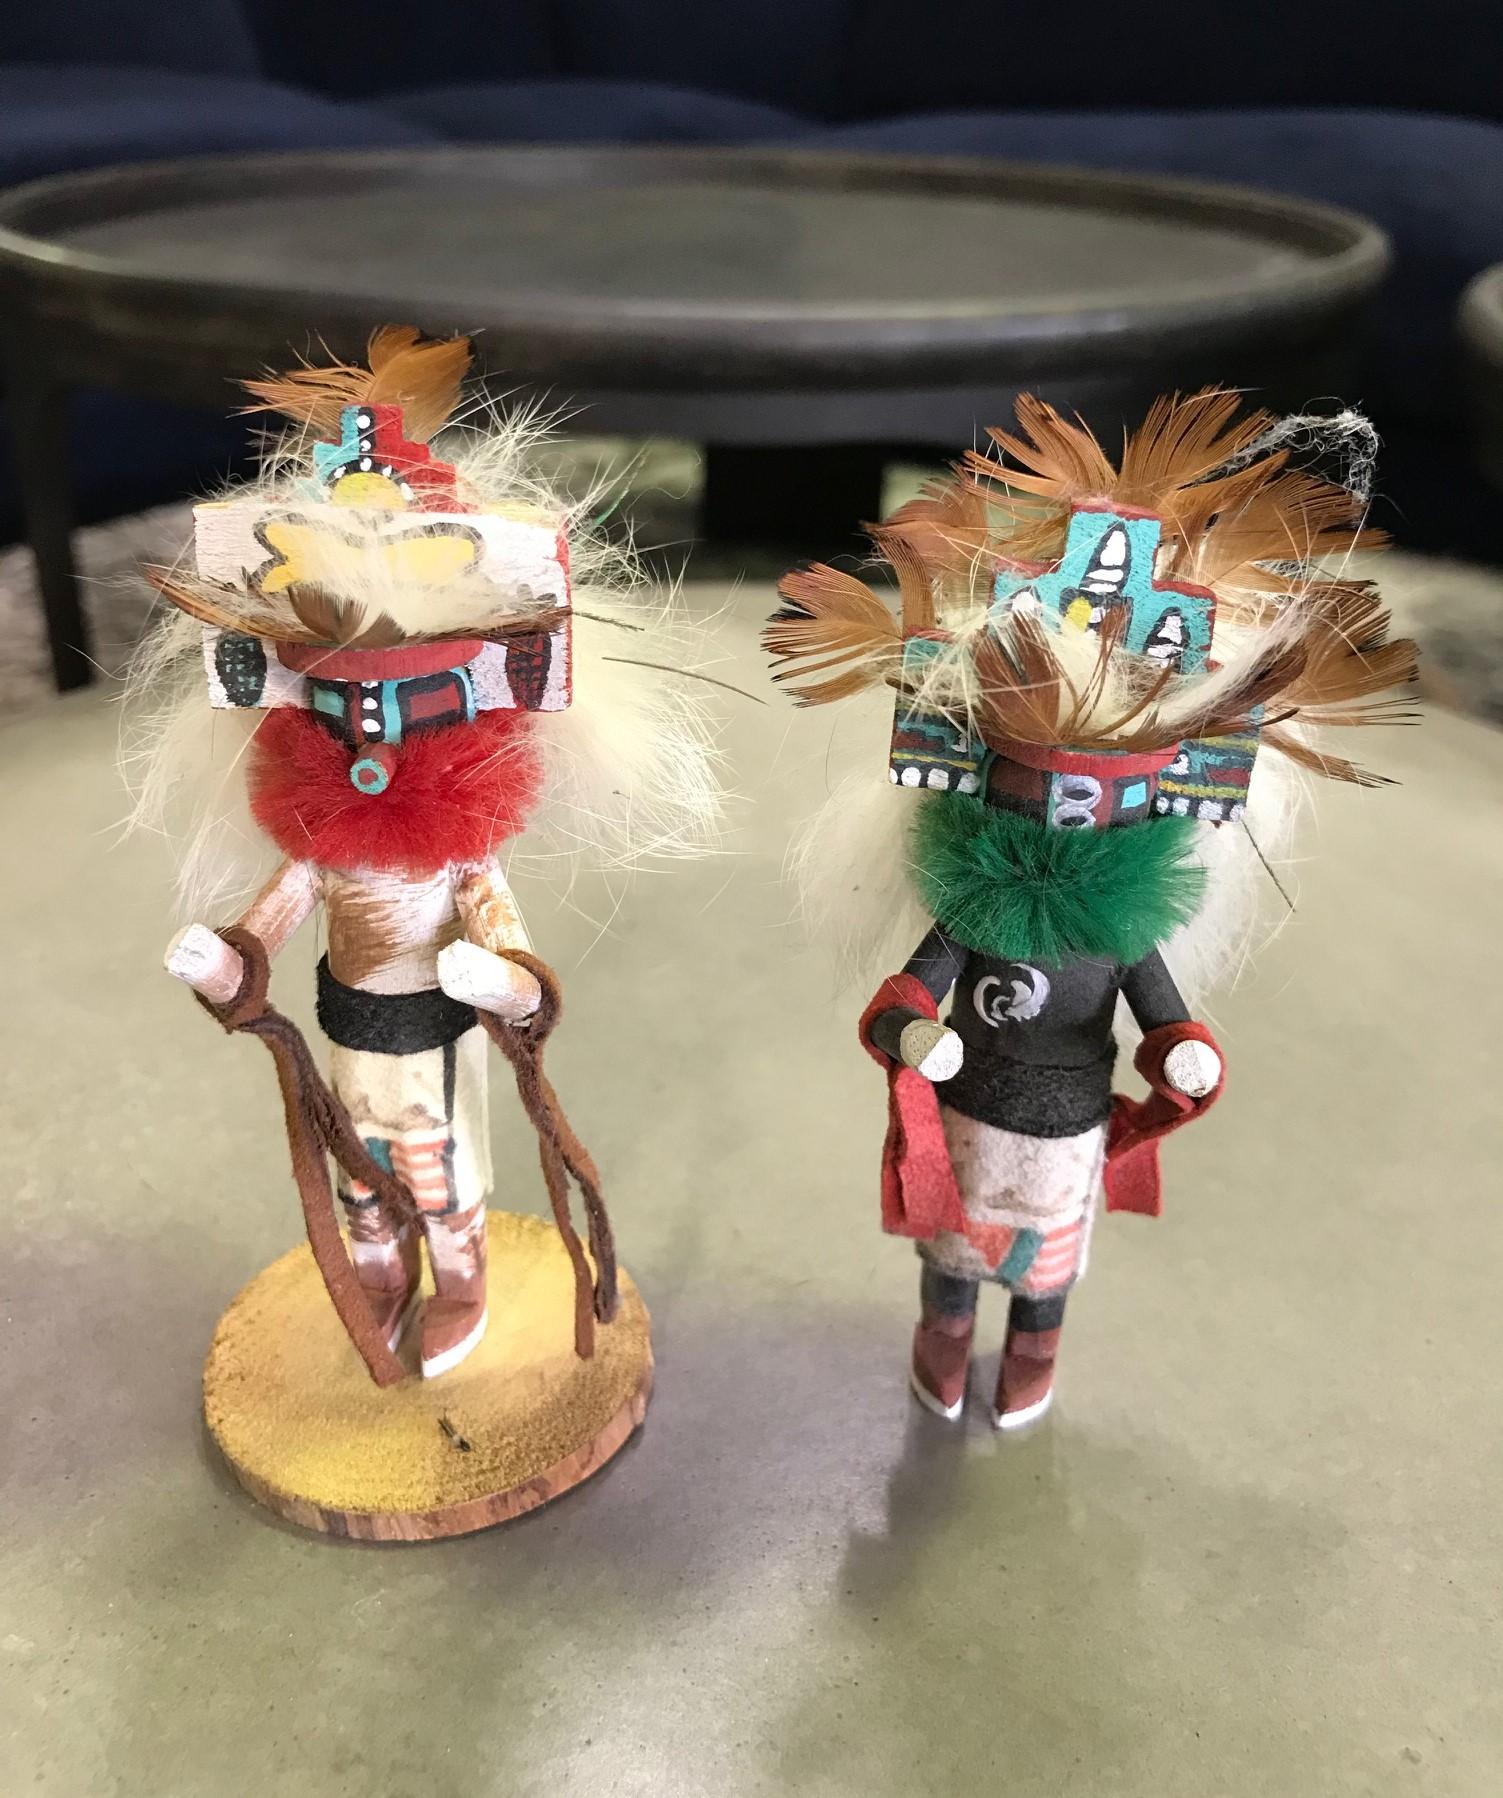 A wonderfully detailed and decorated pair of miniature Kachina dolls.

Signed by the artist on the base of one doll.

From a collection of Native American objects and artifacts.

Dimensions: 4.25